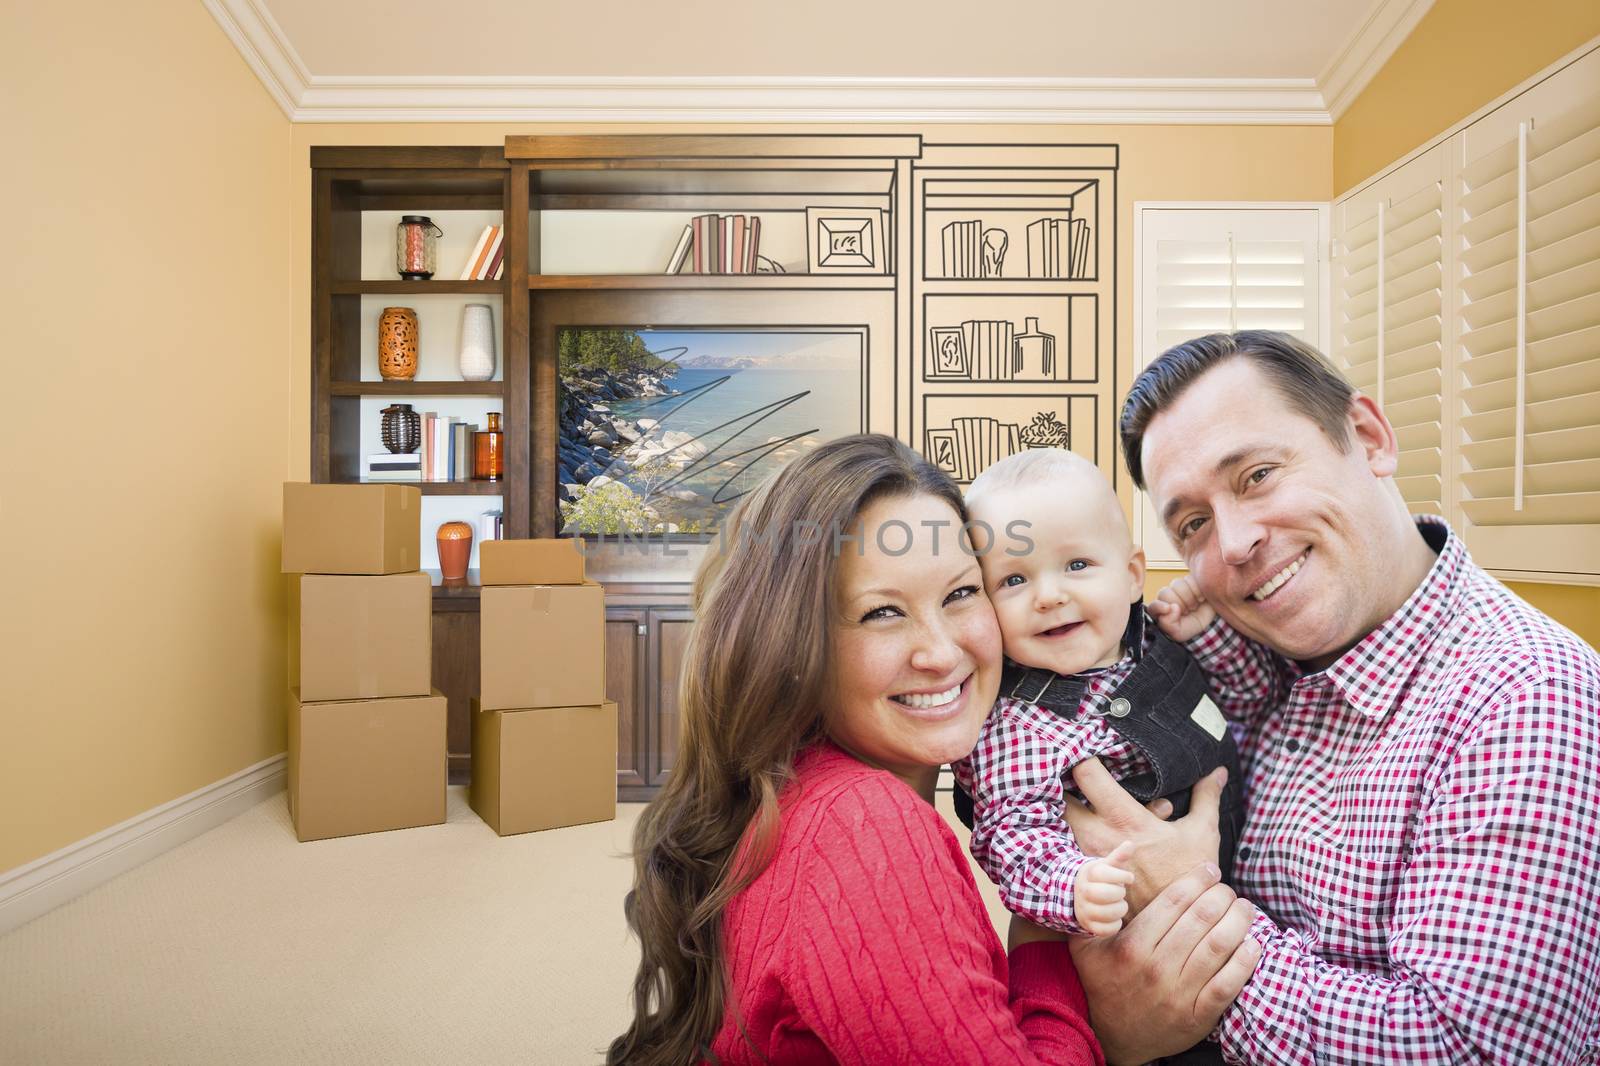 Young Family In Room With Moving Boxes and Drawing of Entertainment Unit On Wall.